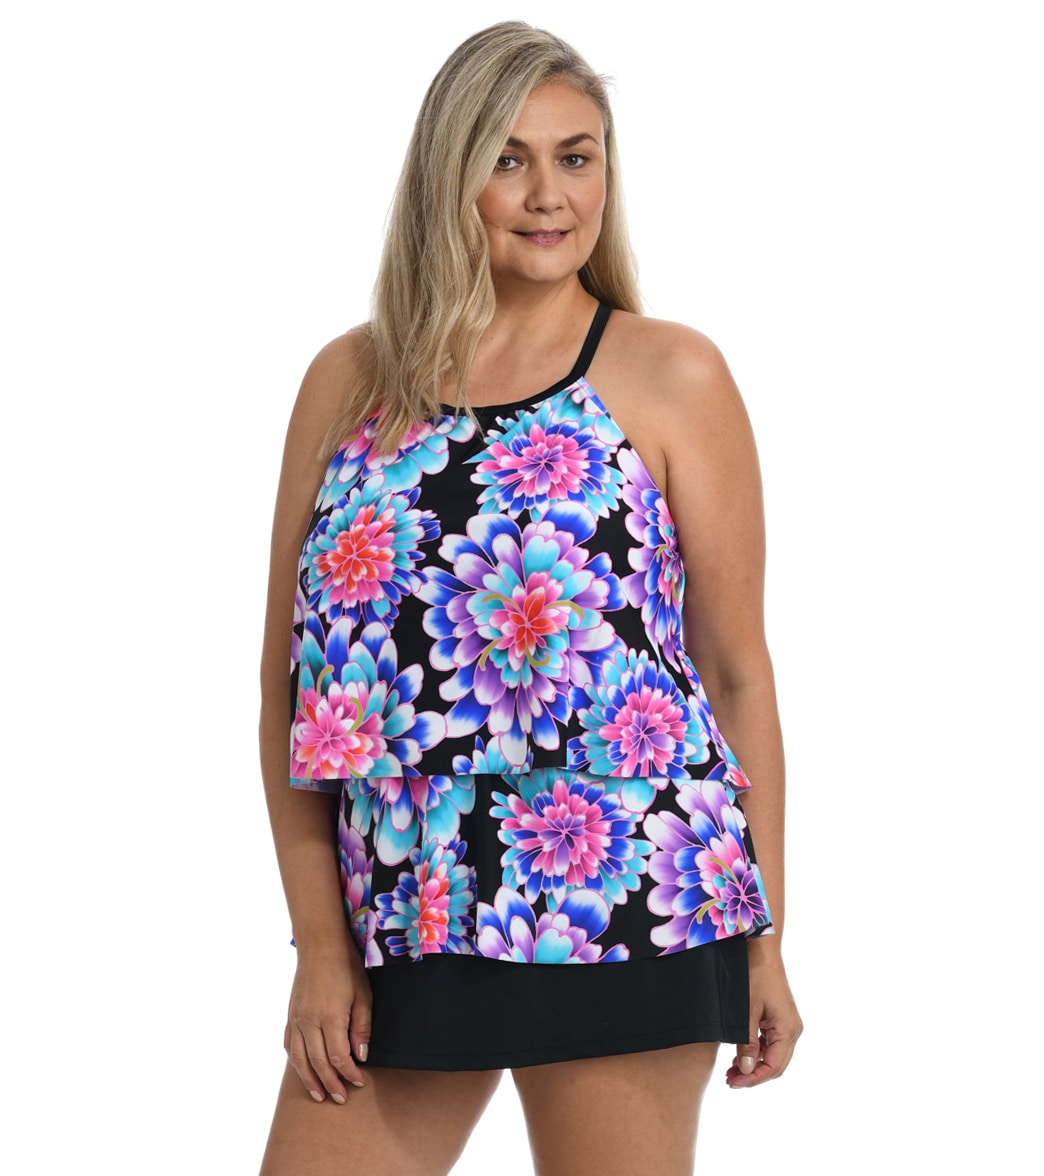 Maxine Womens Plus Size Mums The Word High Neck Tankini Top